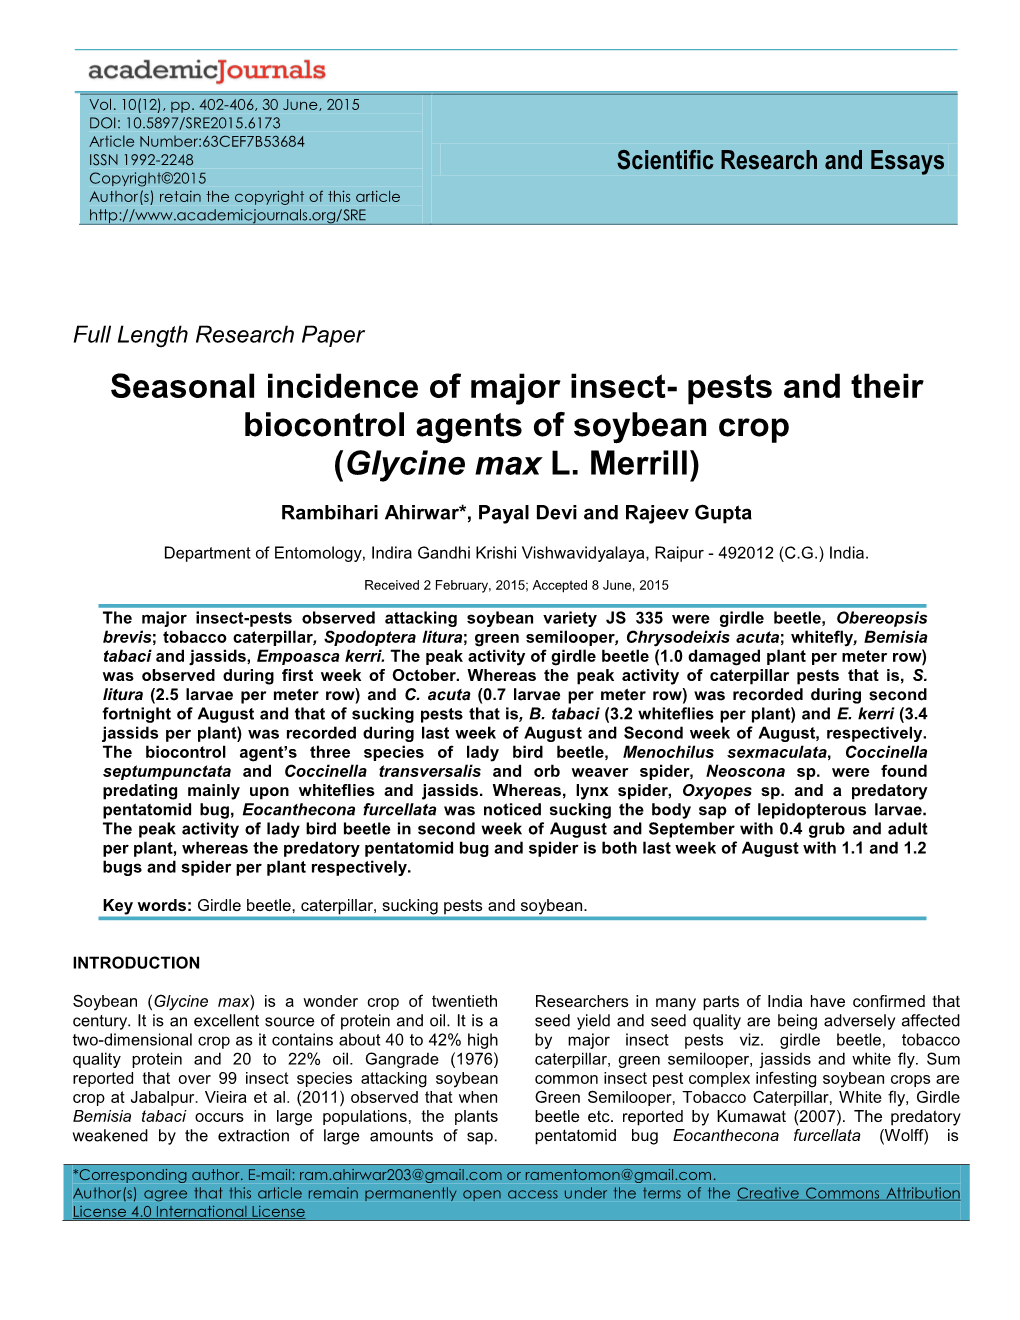 Seasonal Incidence of Major Insect- Pests and Their Biocontrol Agents of Soybean Crop (Glycine Max L